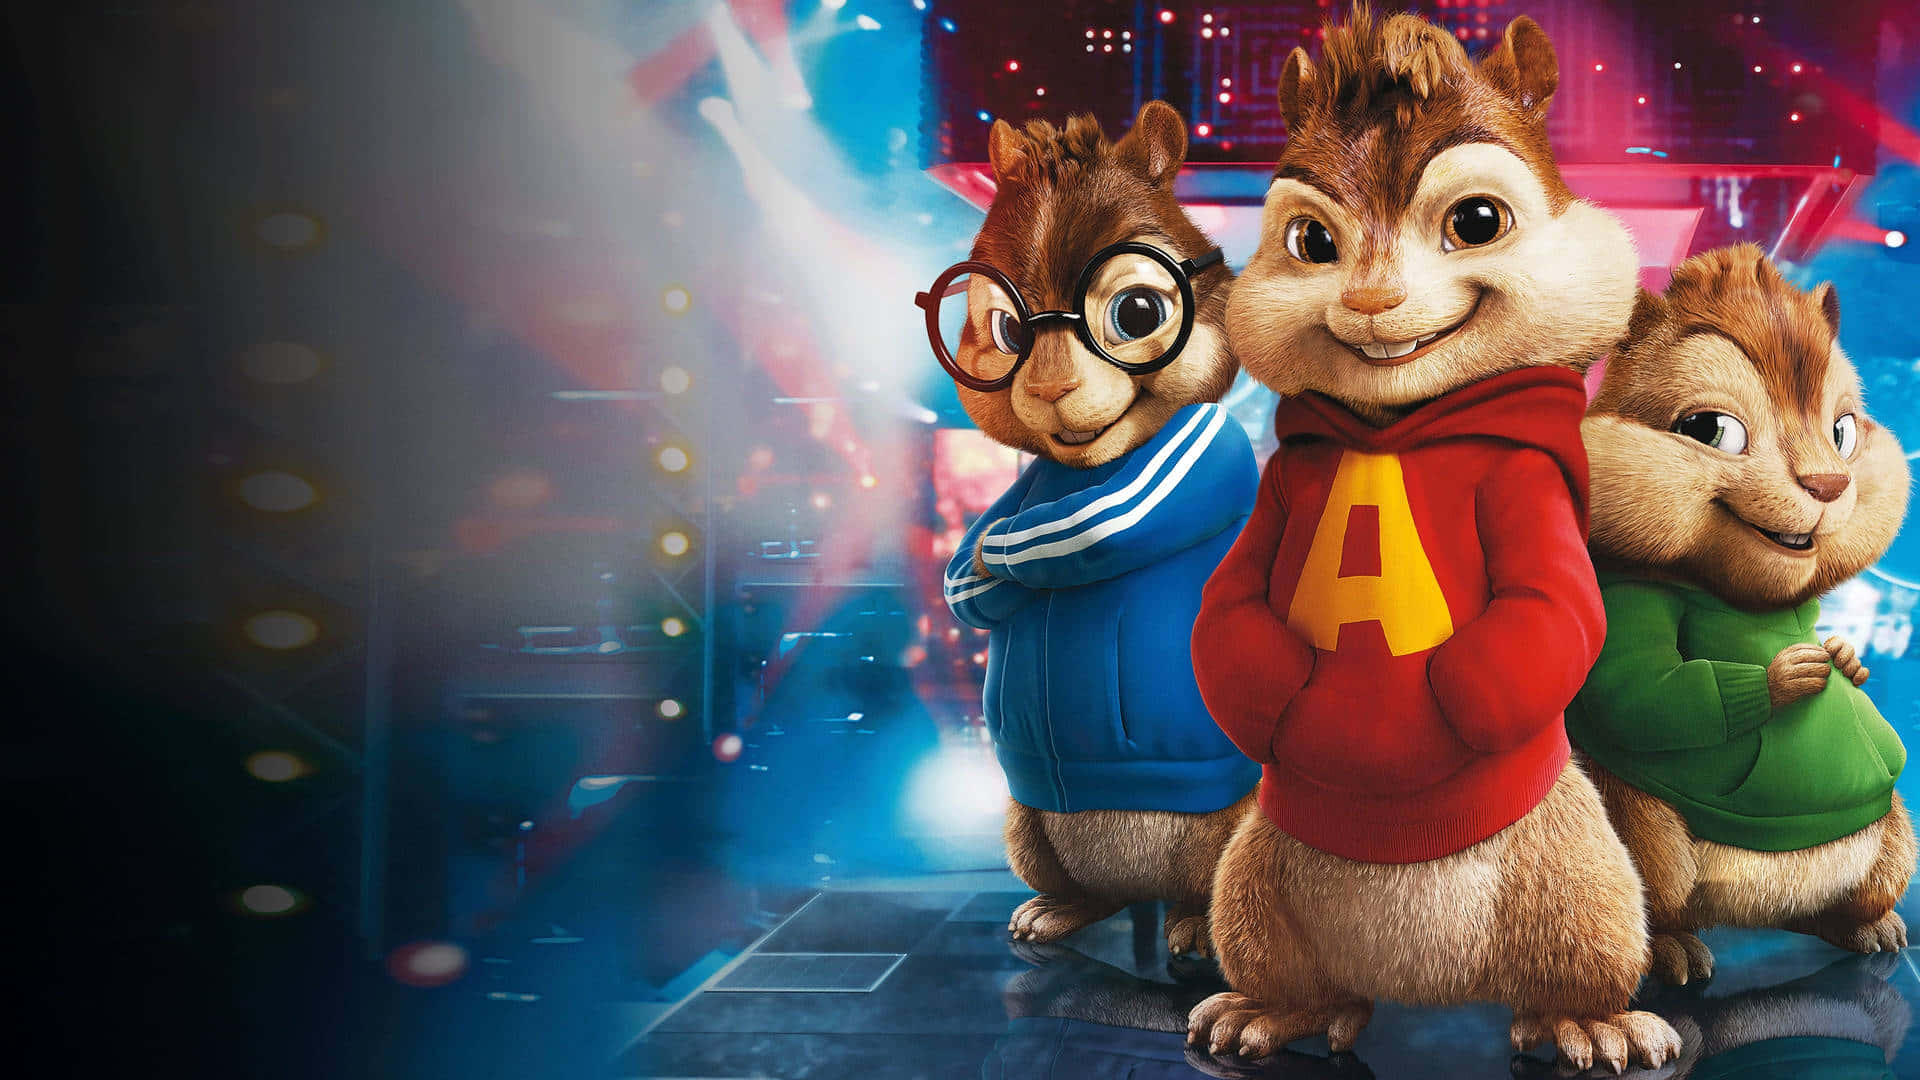 Join Alvin, Simon and Theodore in the fun-filled world of chipmunk adventures!